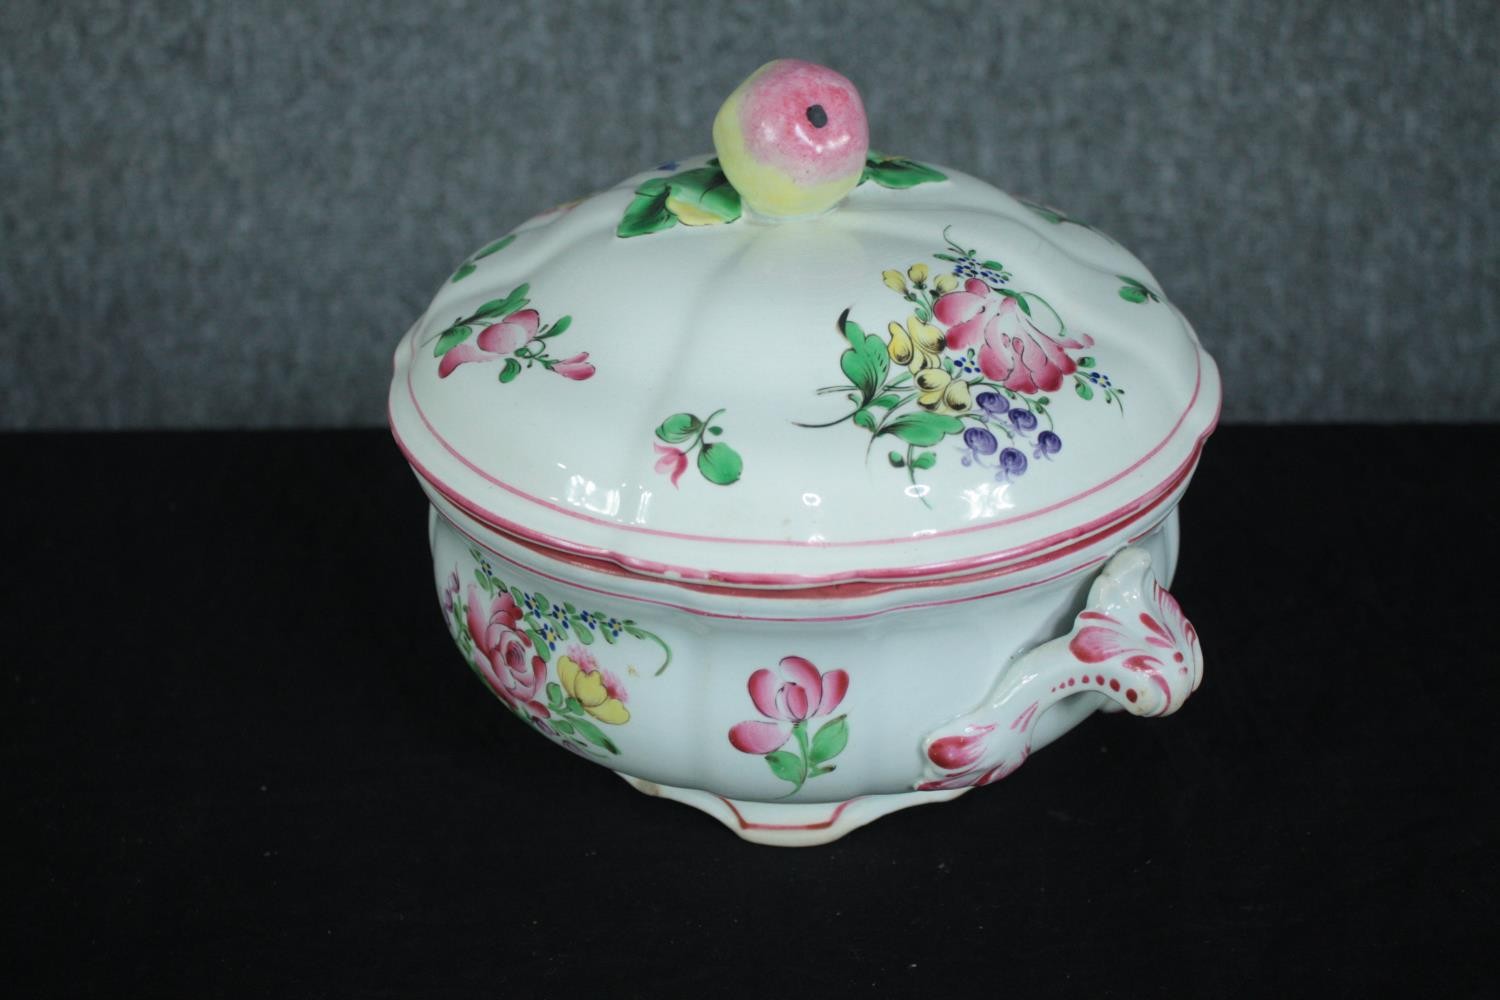 A lidded Luneville serving dish with floral decoration. H.18 Dia.20 cm. - Image 2 of 6